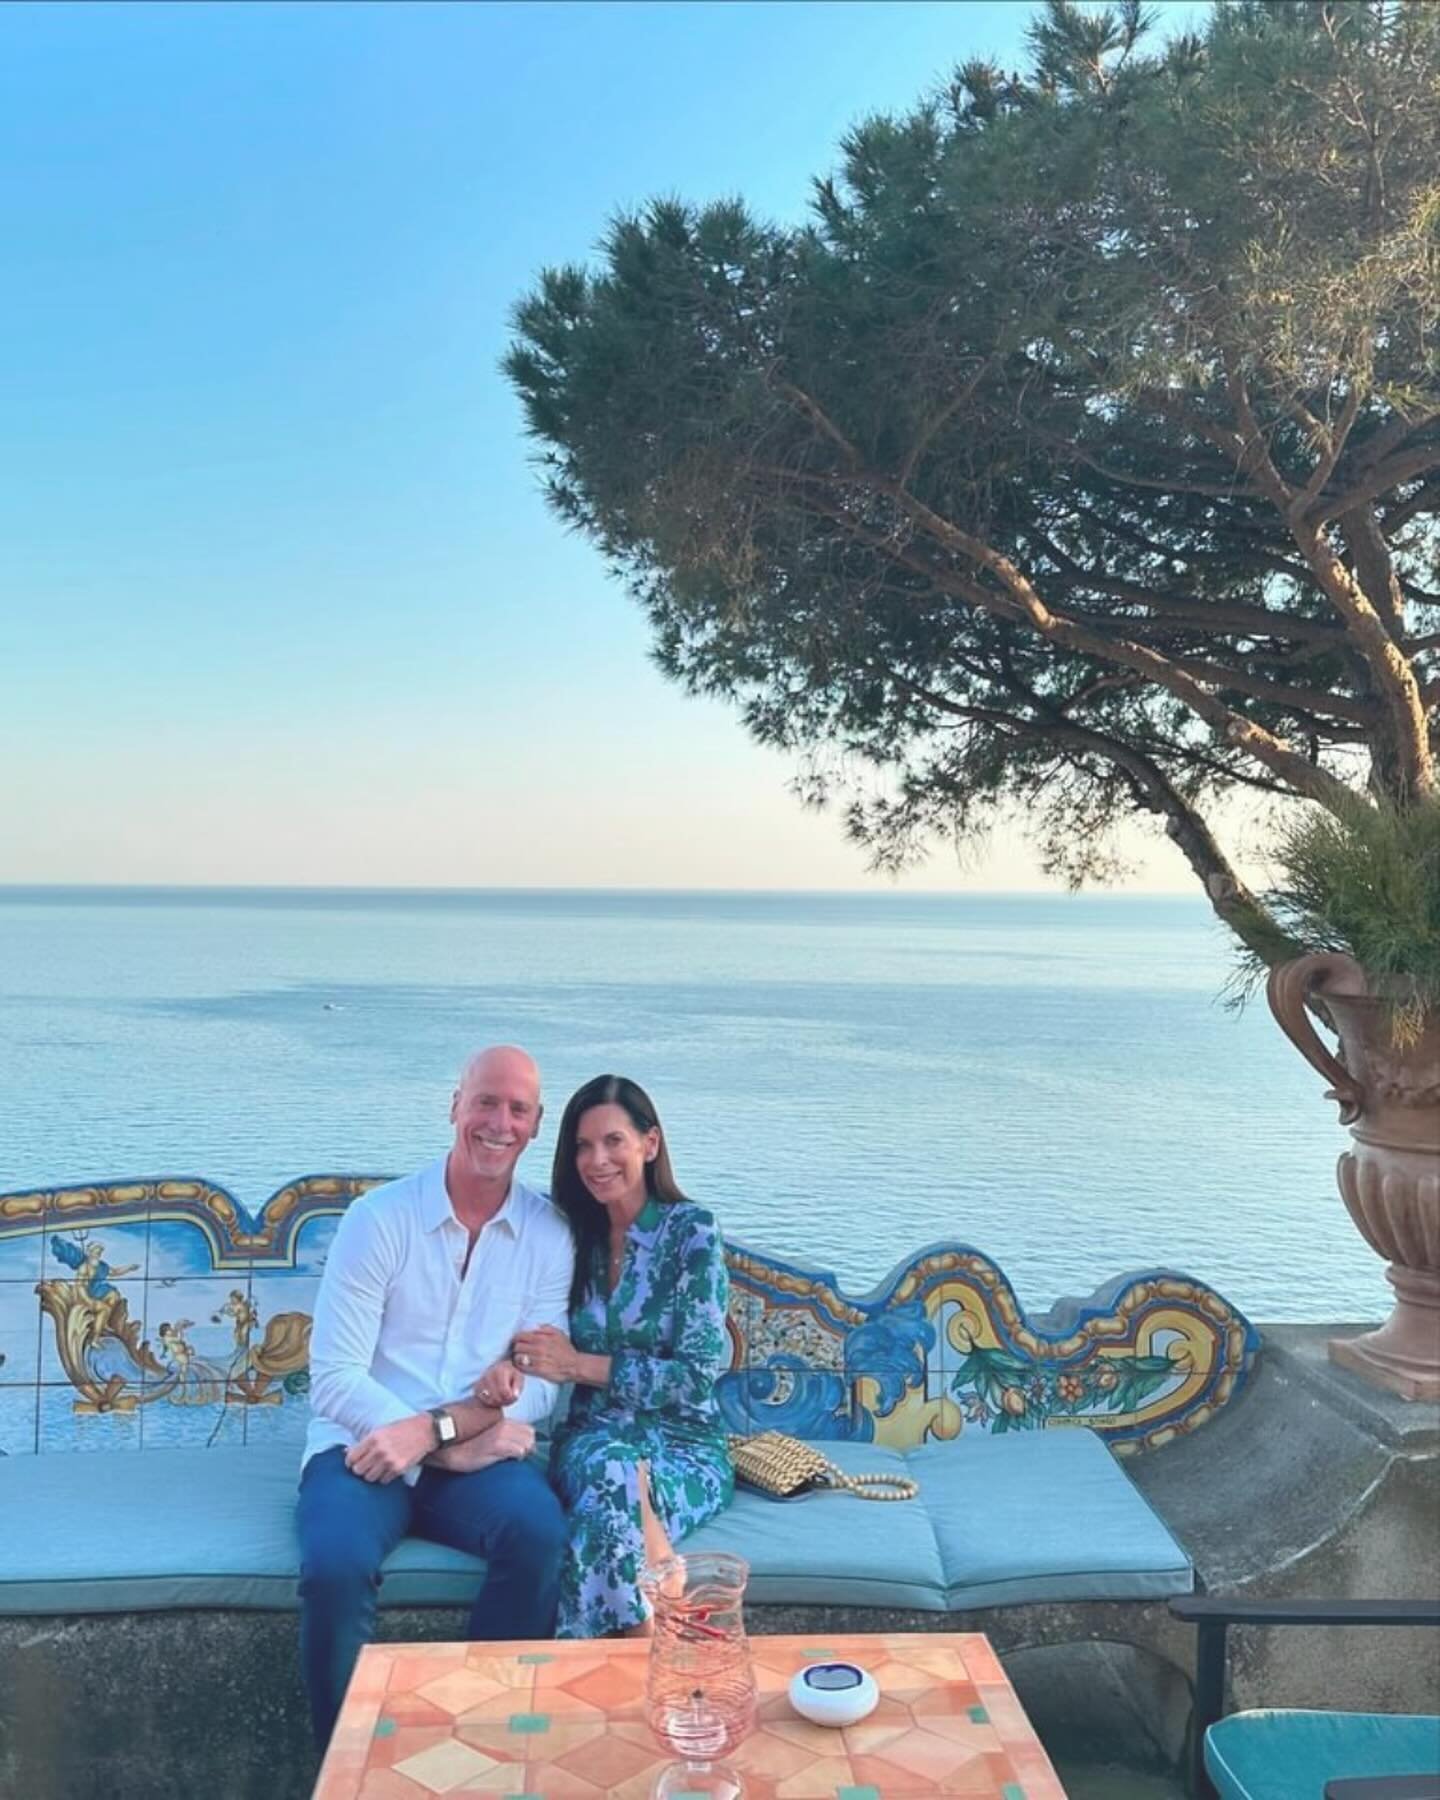 Amore on the Amalfi 🥂

We're thrilled to have played a part in this unforgettable proposal on the Amalfi Coast! At Red Letter Travel, we cherish being part of your special celebrations and making each trip as unique and memorable as this beautiful e